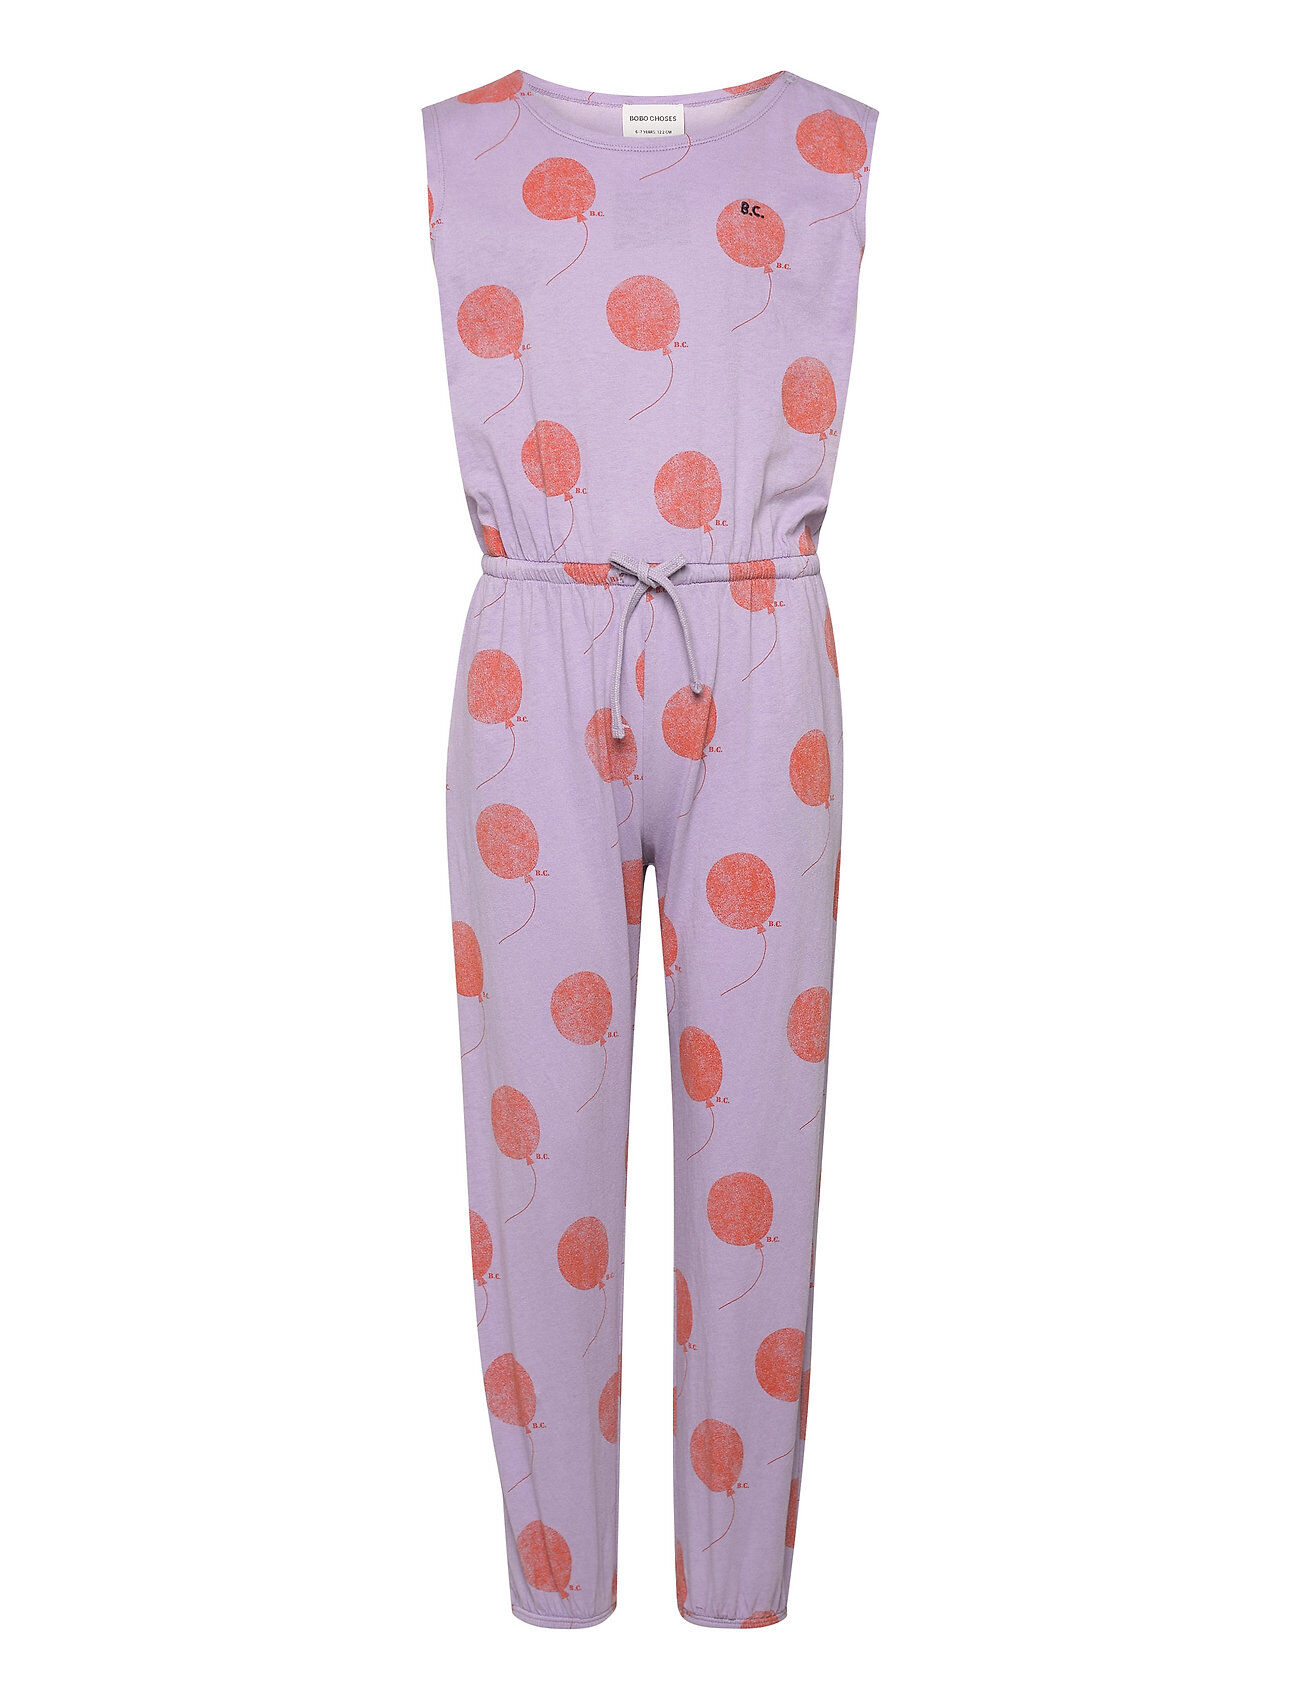 Bobo Choses Balloon All Over Overall Jumpsuit Multi/mønstret Bobo Choses